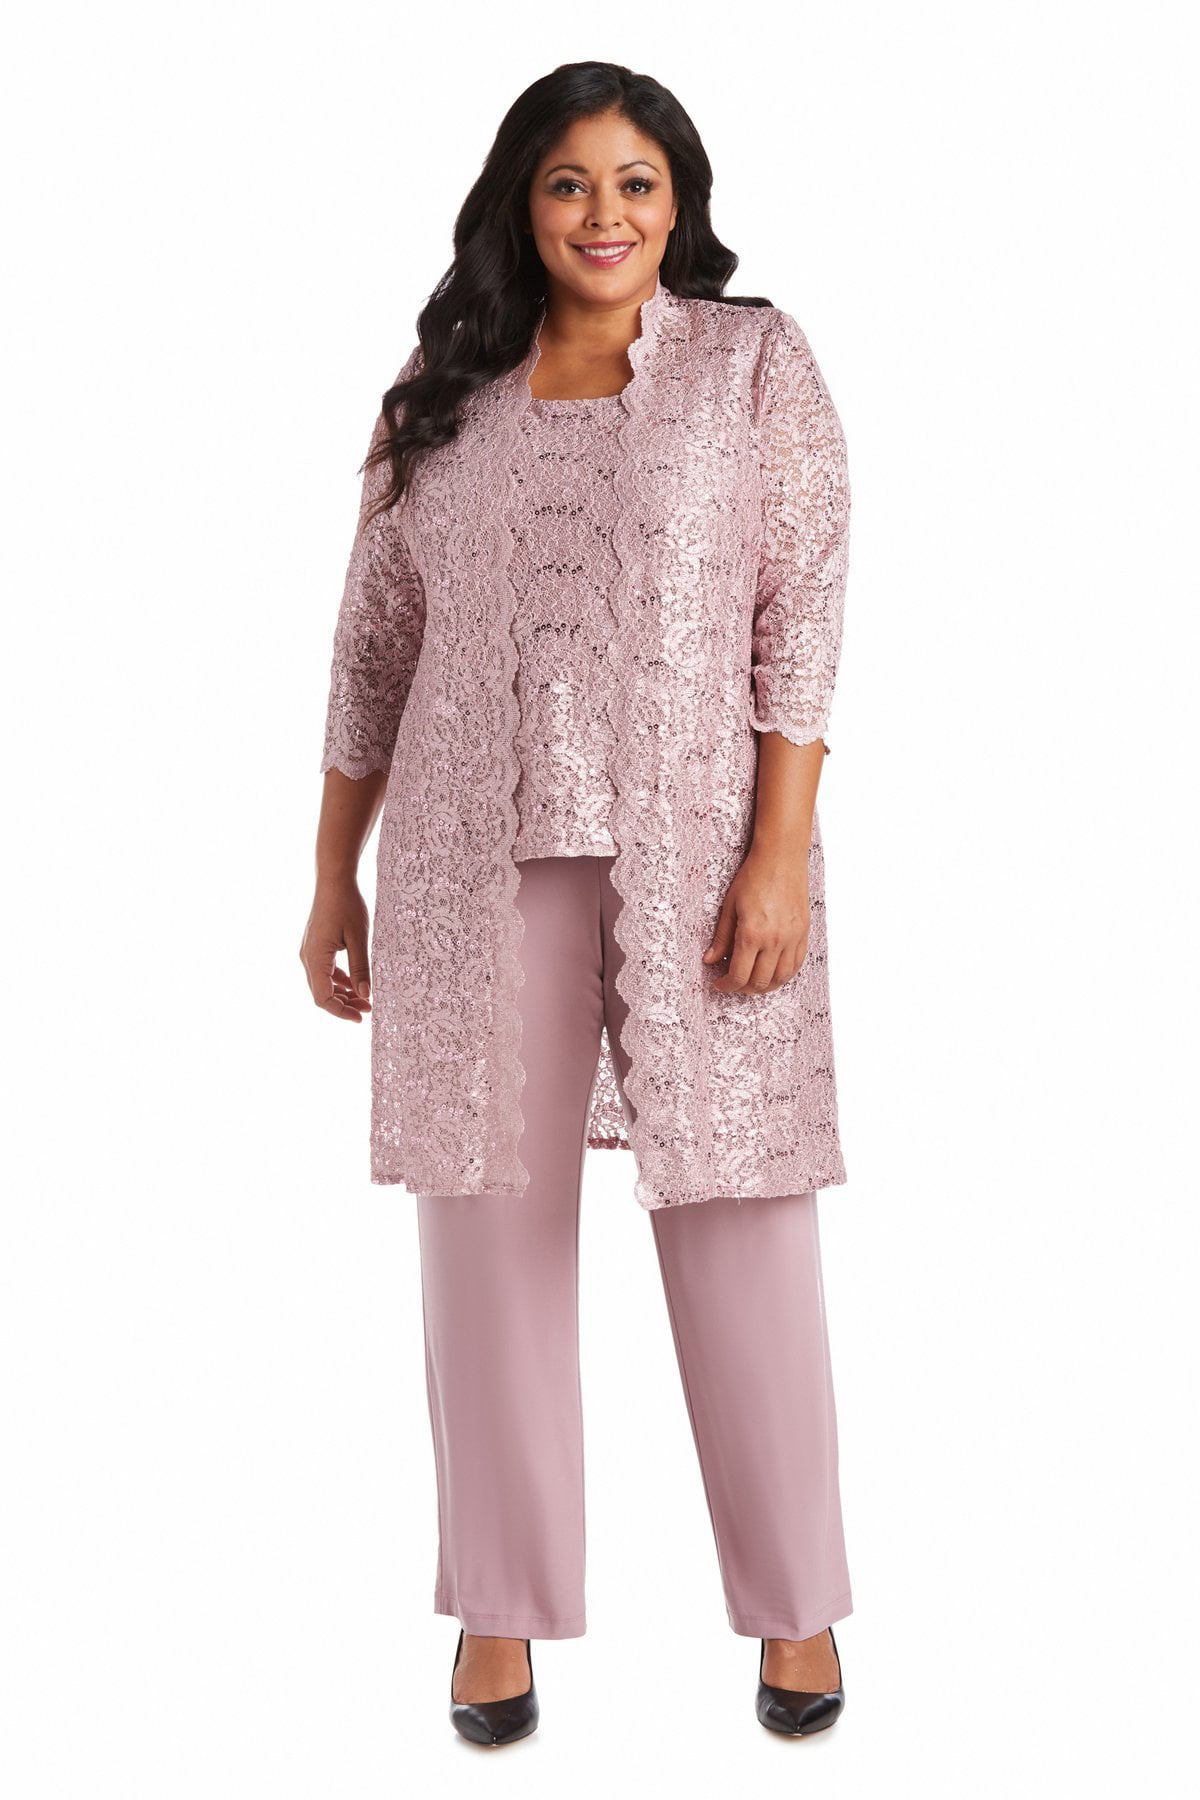 R&M Richards Plus Size Mother of The Bride Pant Suit 3 Pieces Dress Set Sleeveless with Matching Lace Jacket 